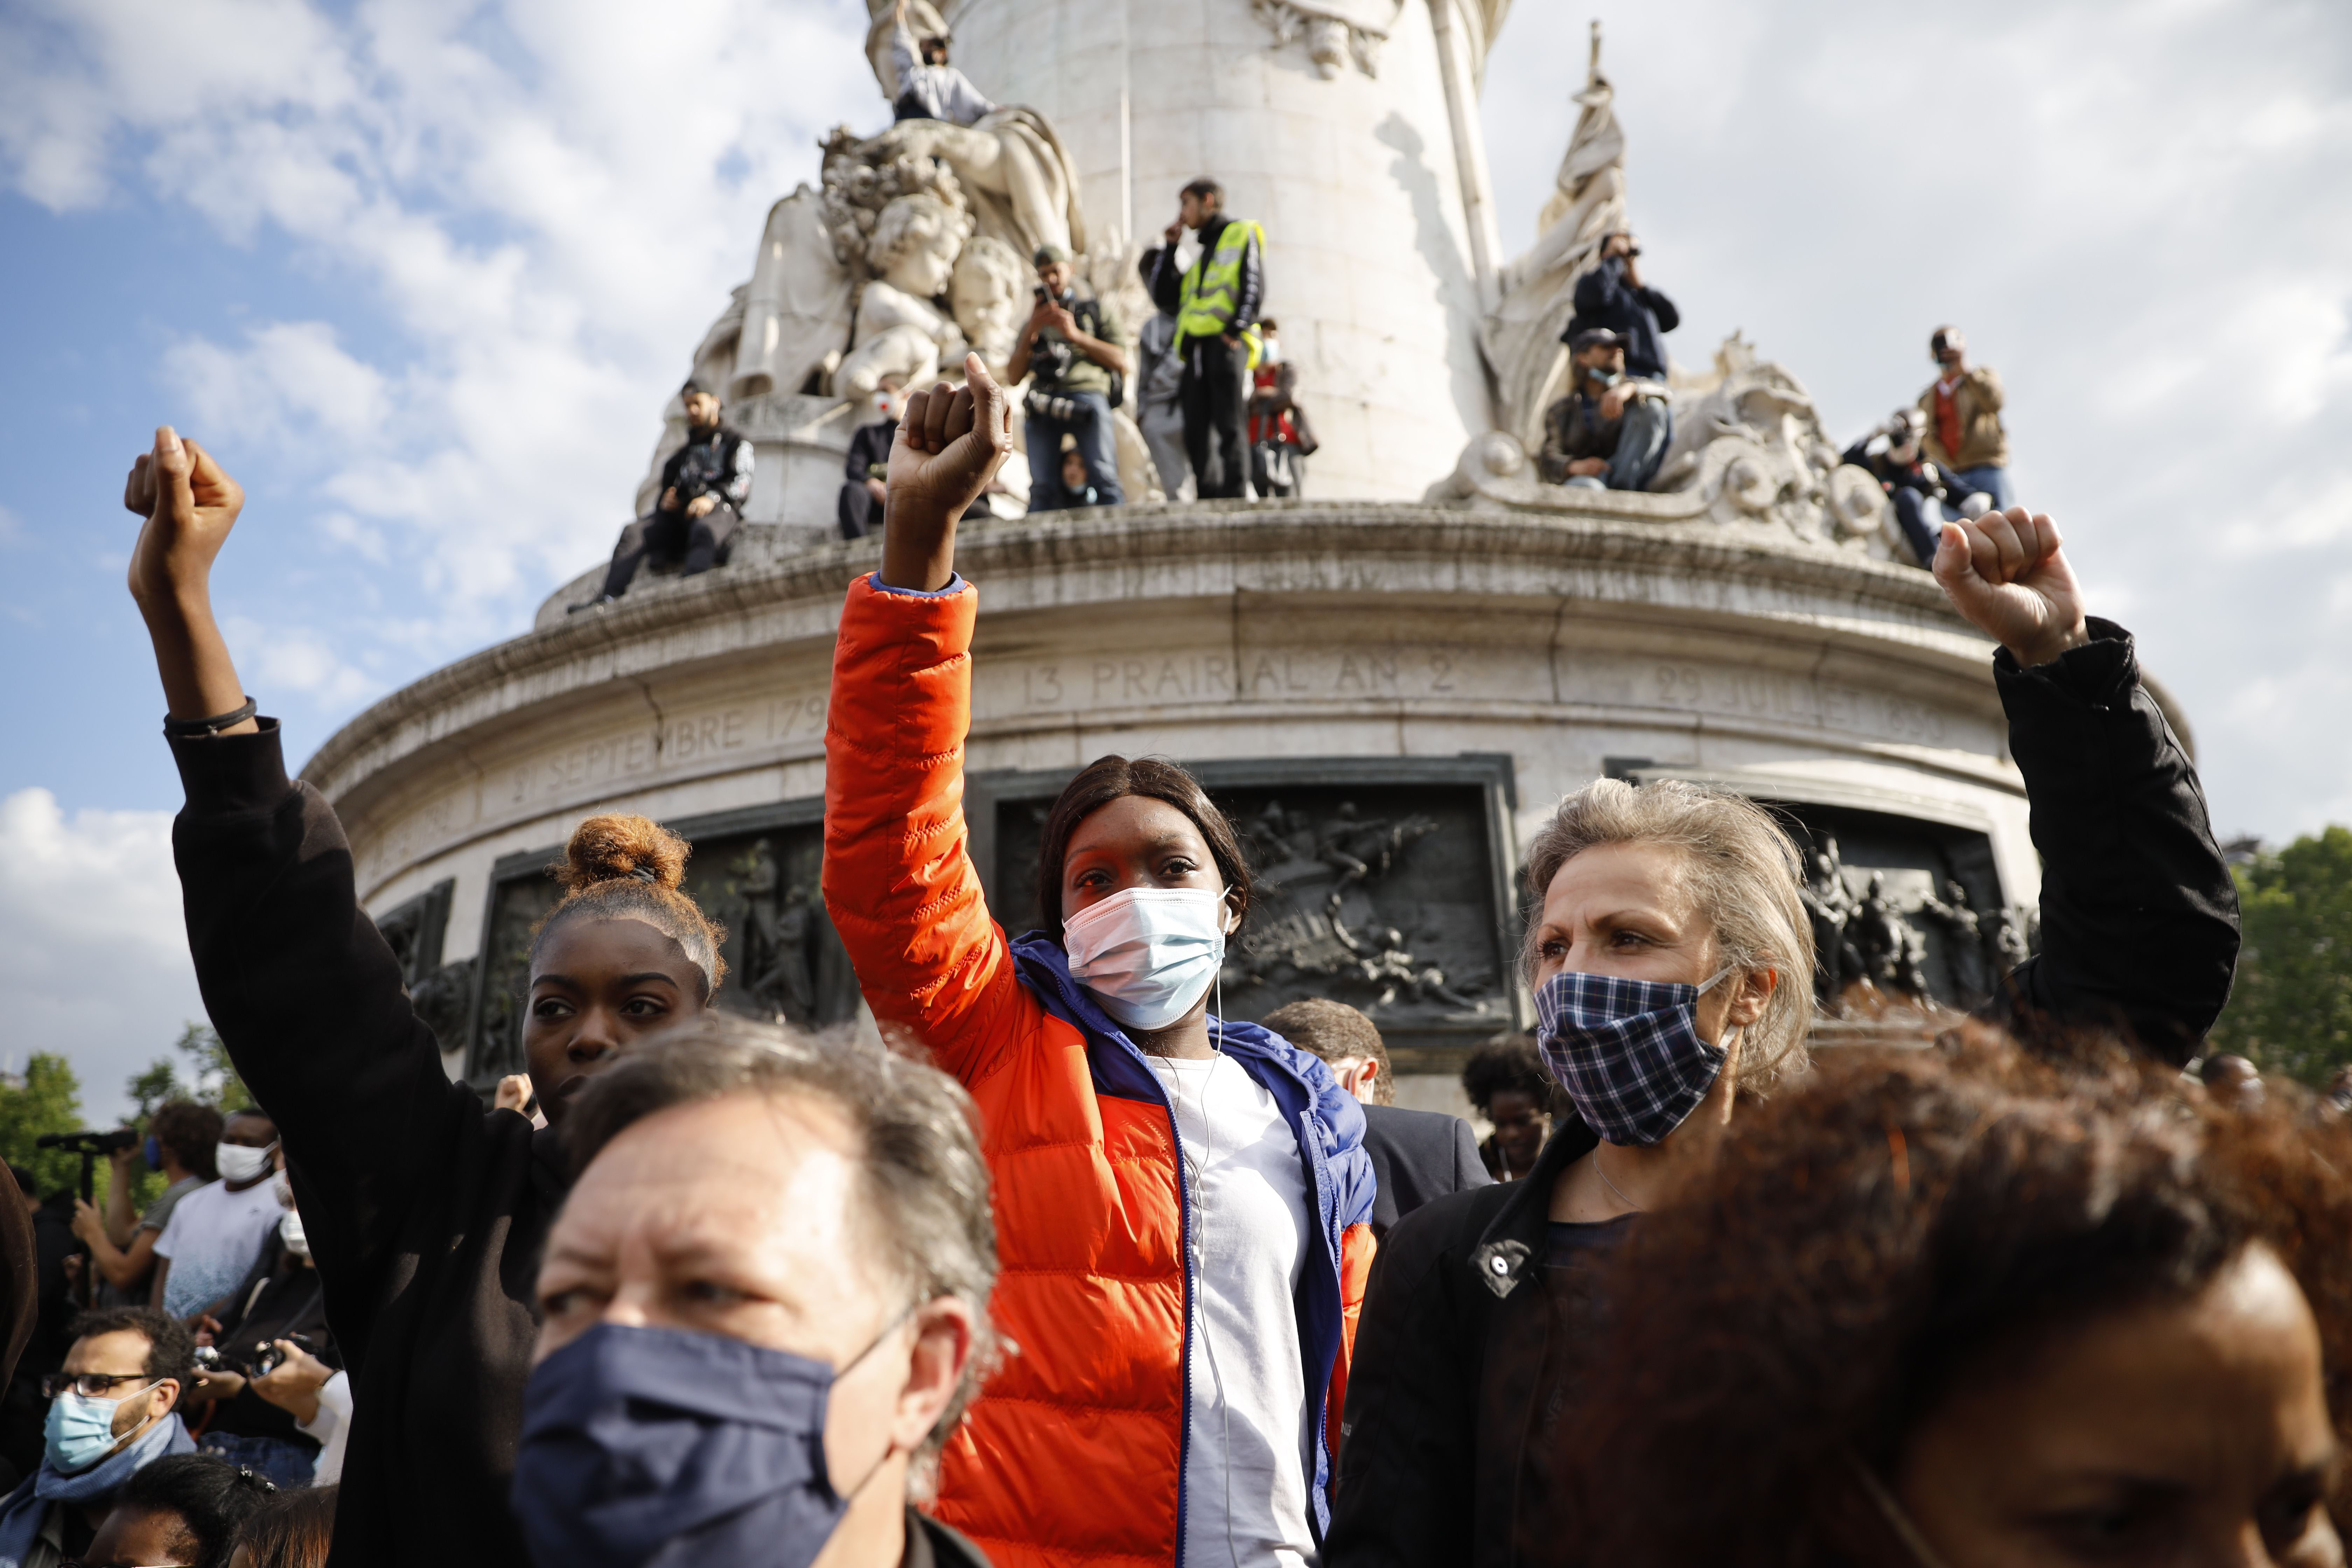 Paris police urge businesses to take precautions ahead of planned protests